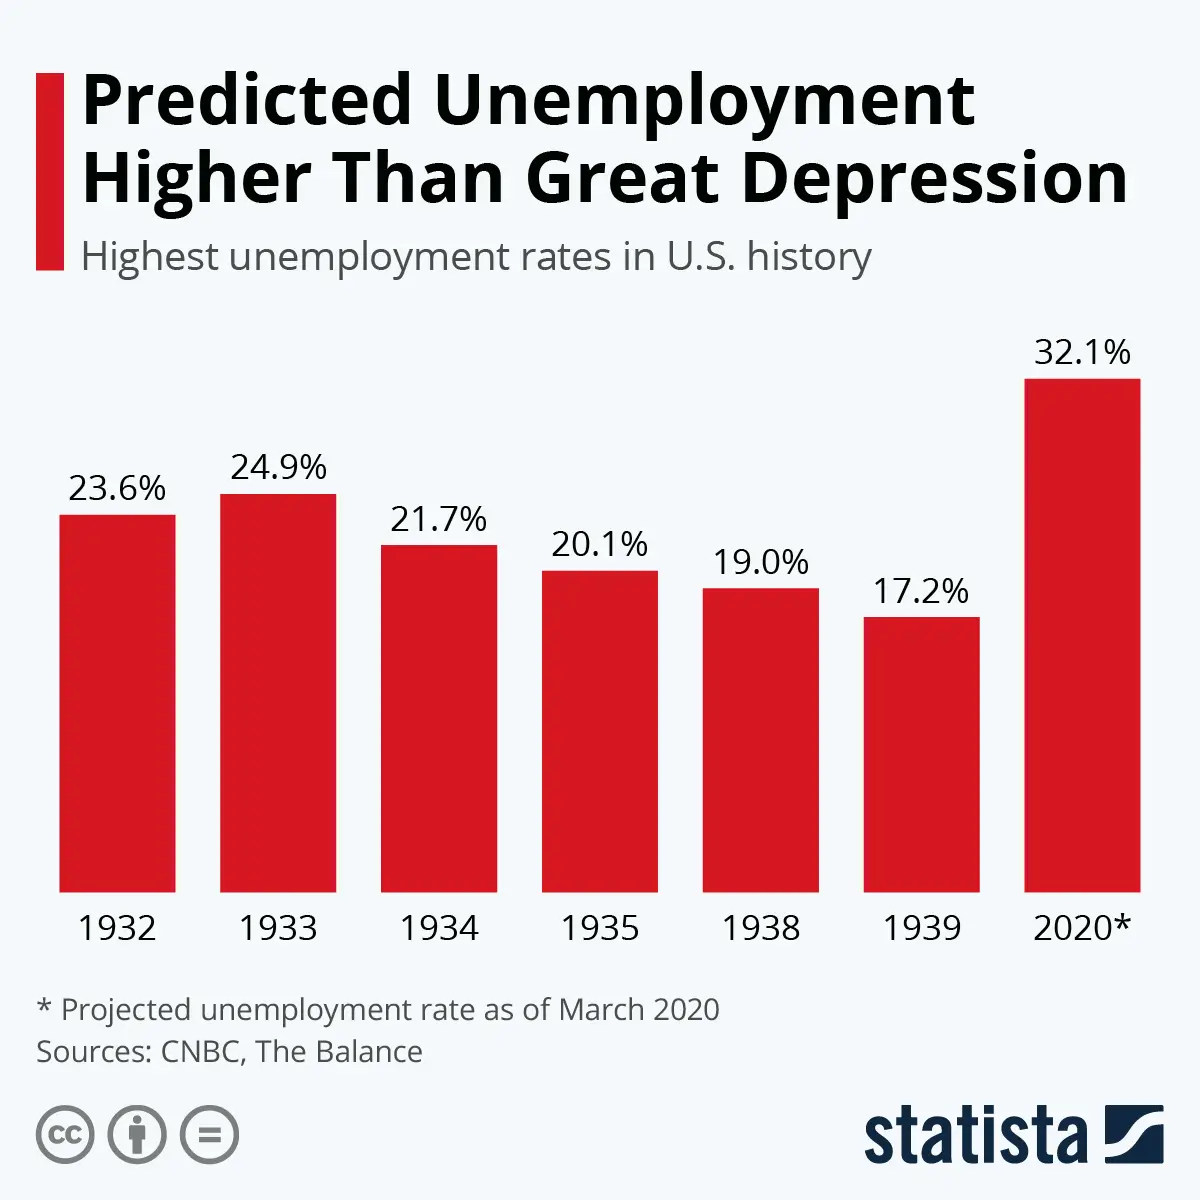 Highest U.S. unemployment rates in history and tomorrow